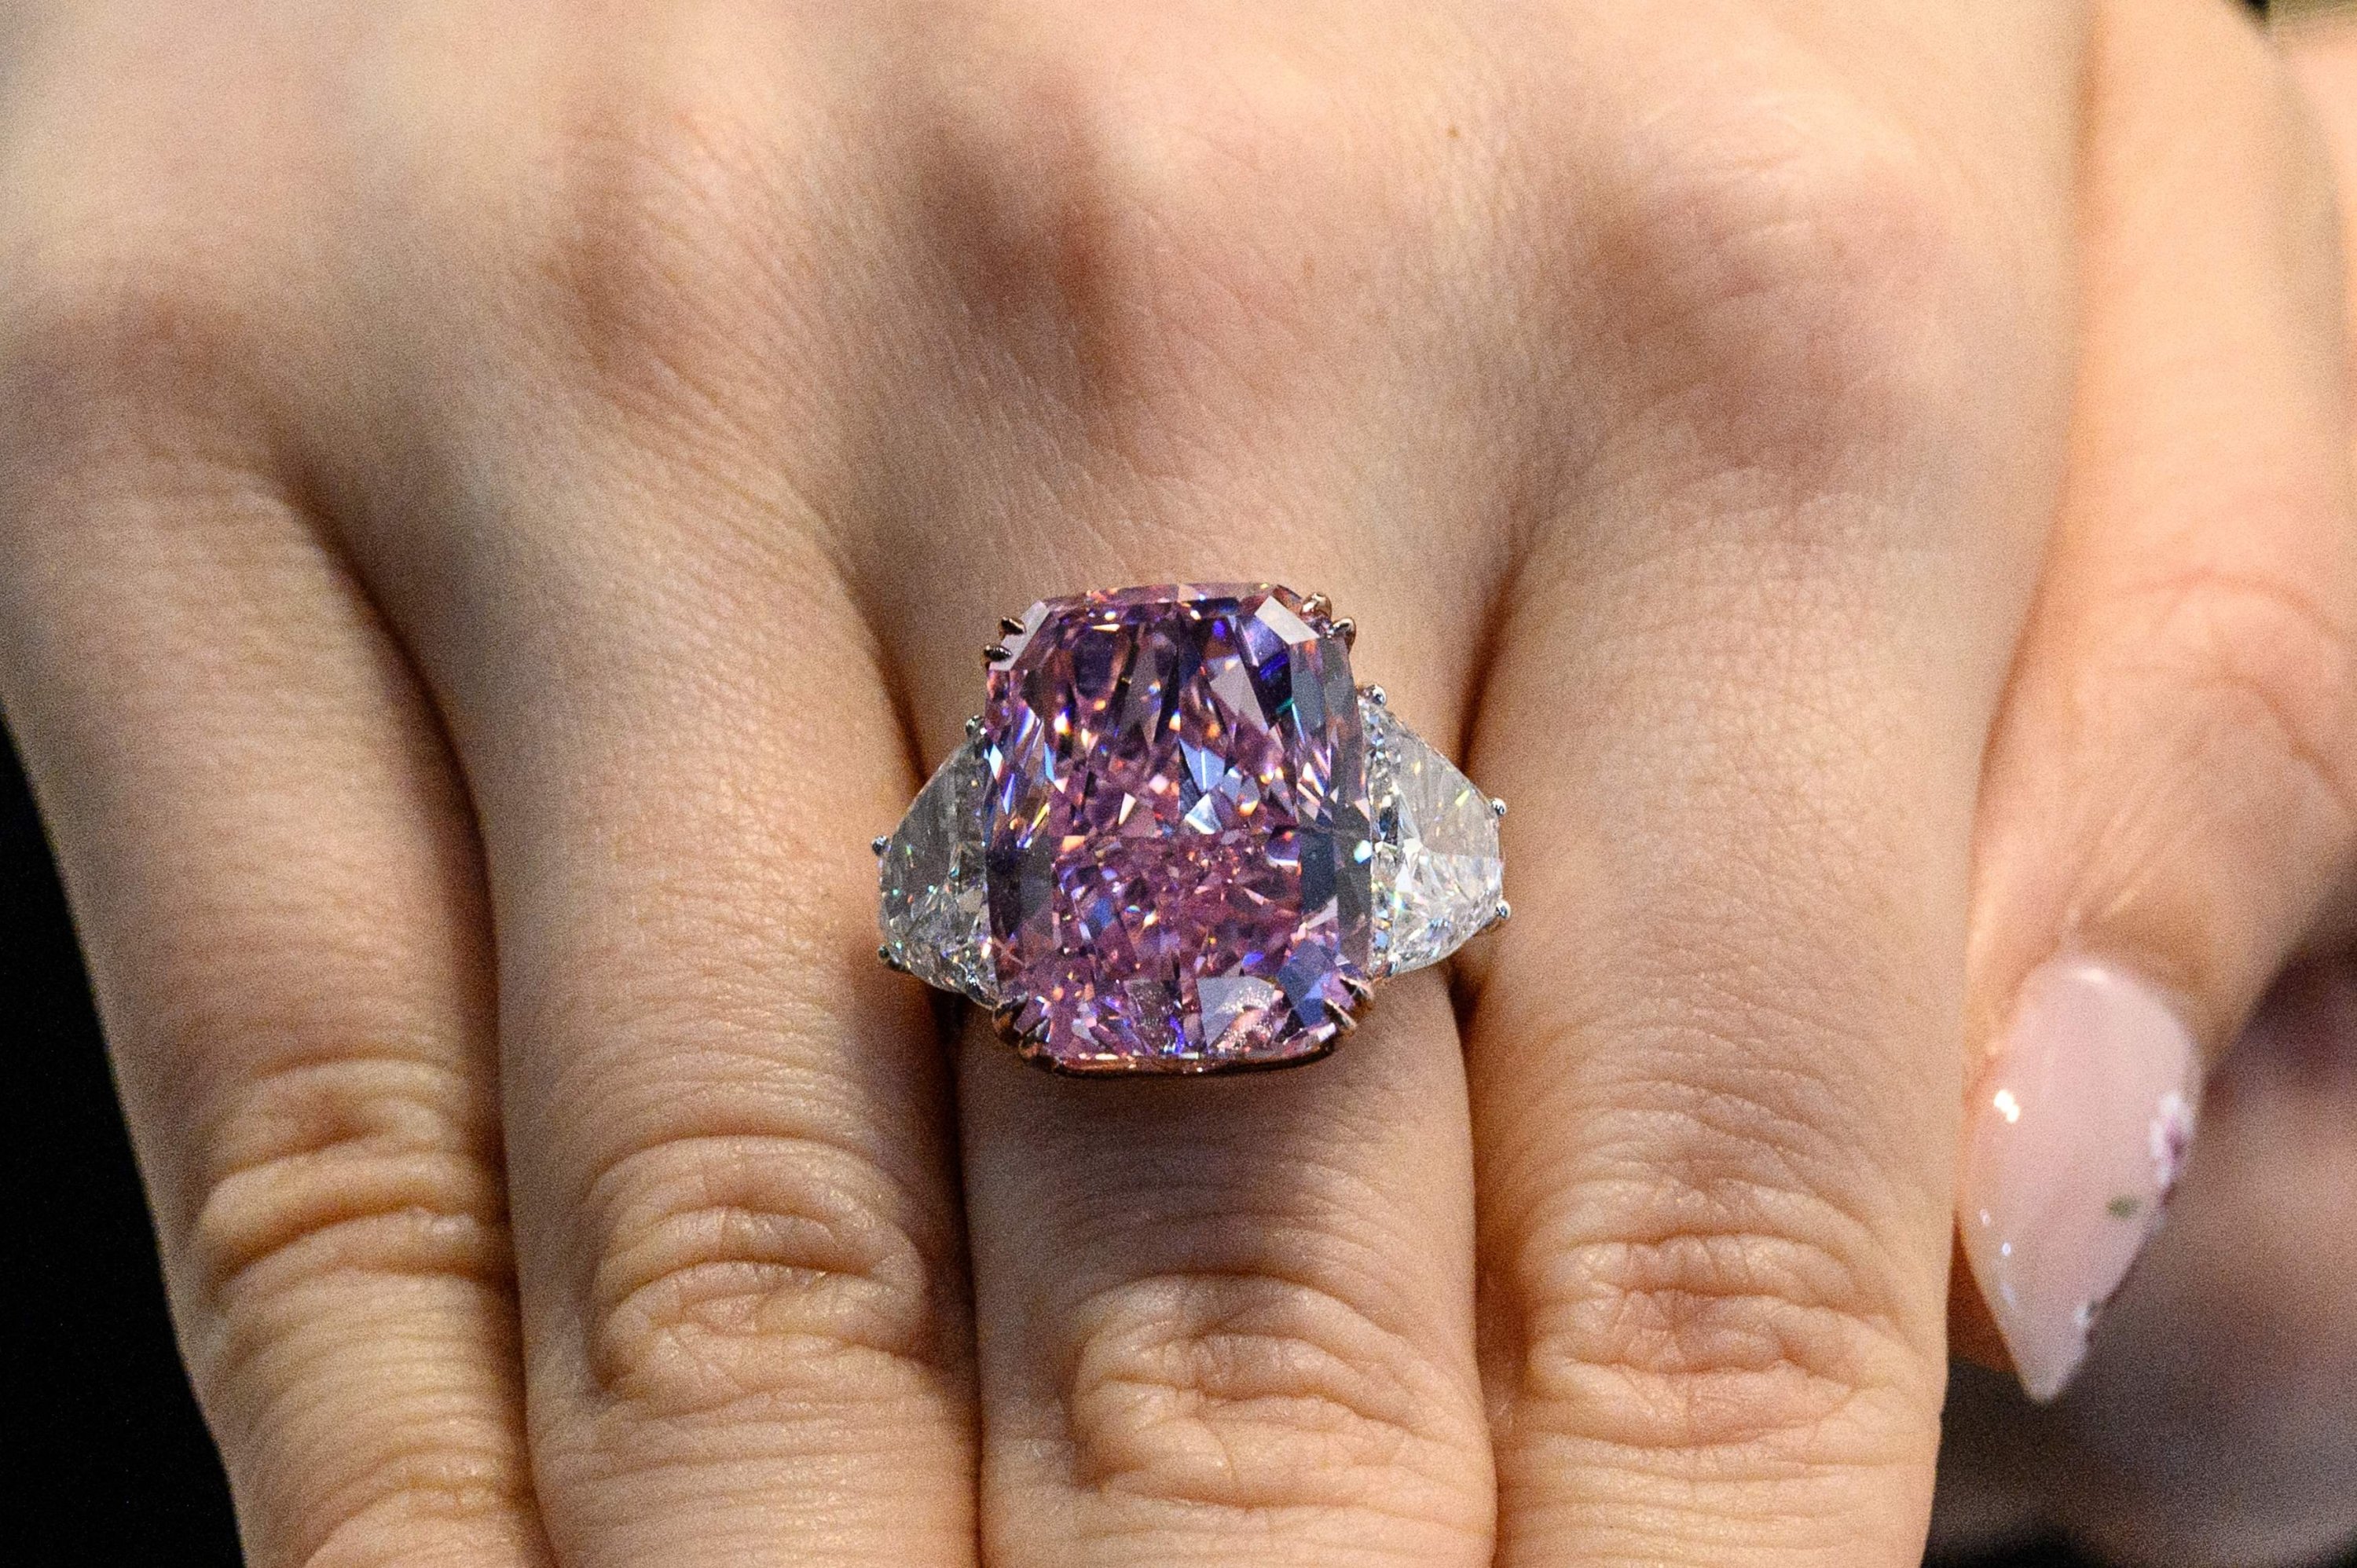 A woman displays the Sakura Diamond, a 15.81 carat fancy vivid purple-pink diamond ring, during a Christies pre-auction preview in Hong Kong, May 20, 2021. (AFP Photo)